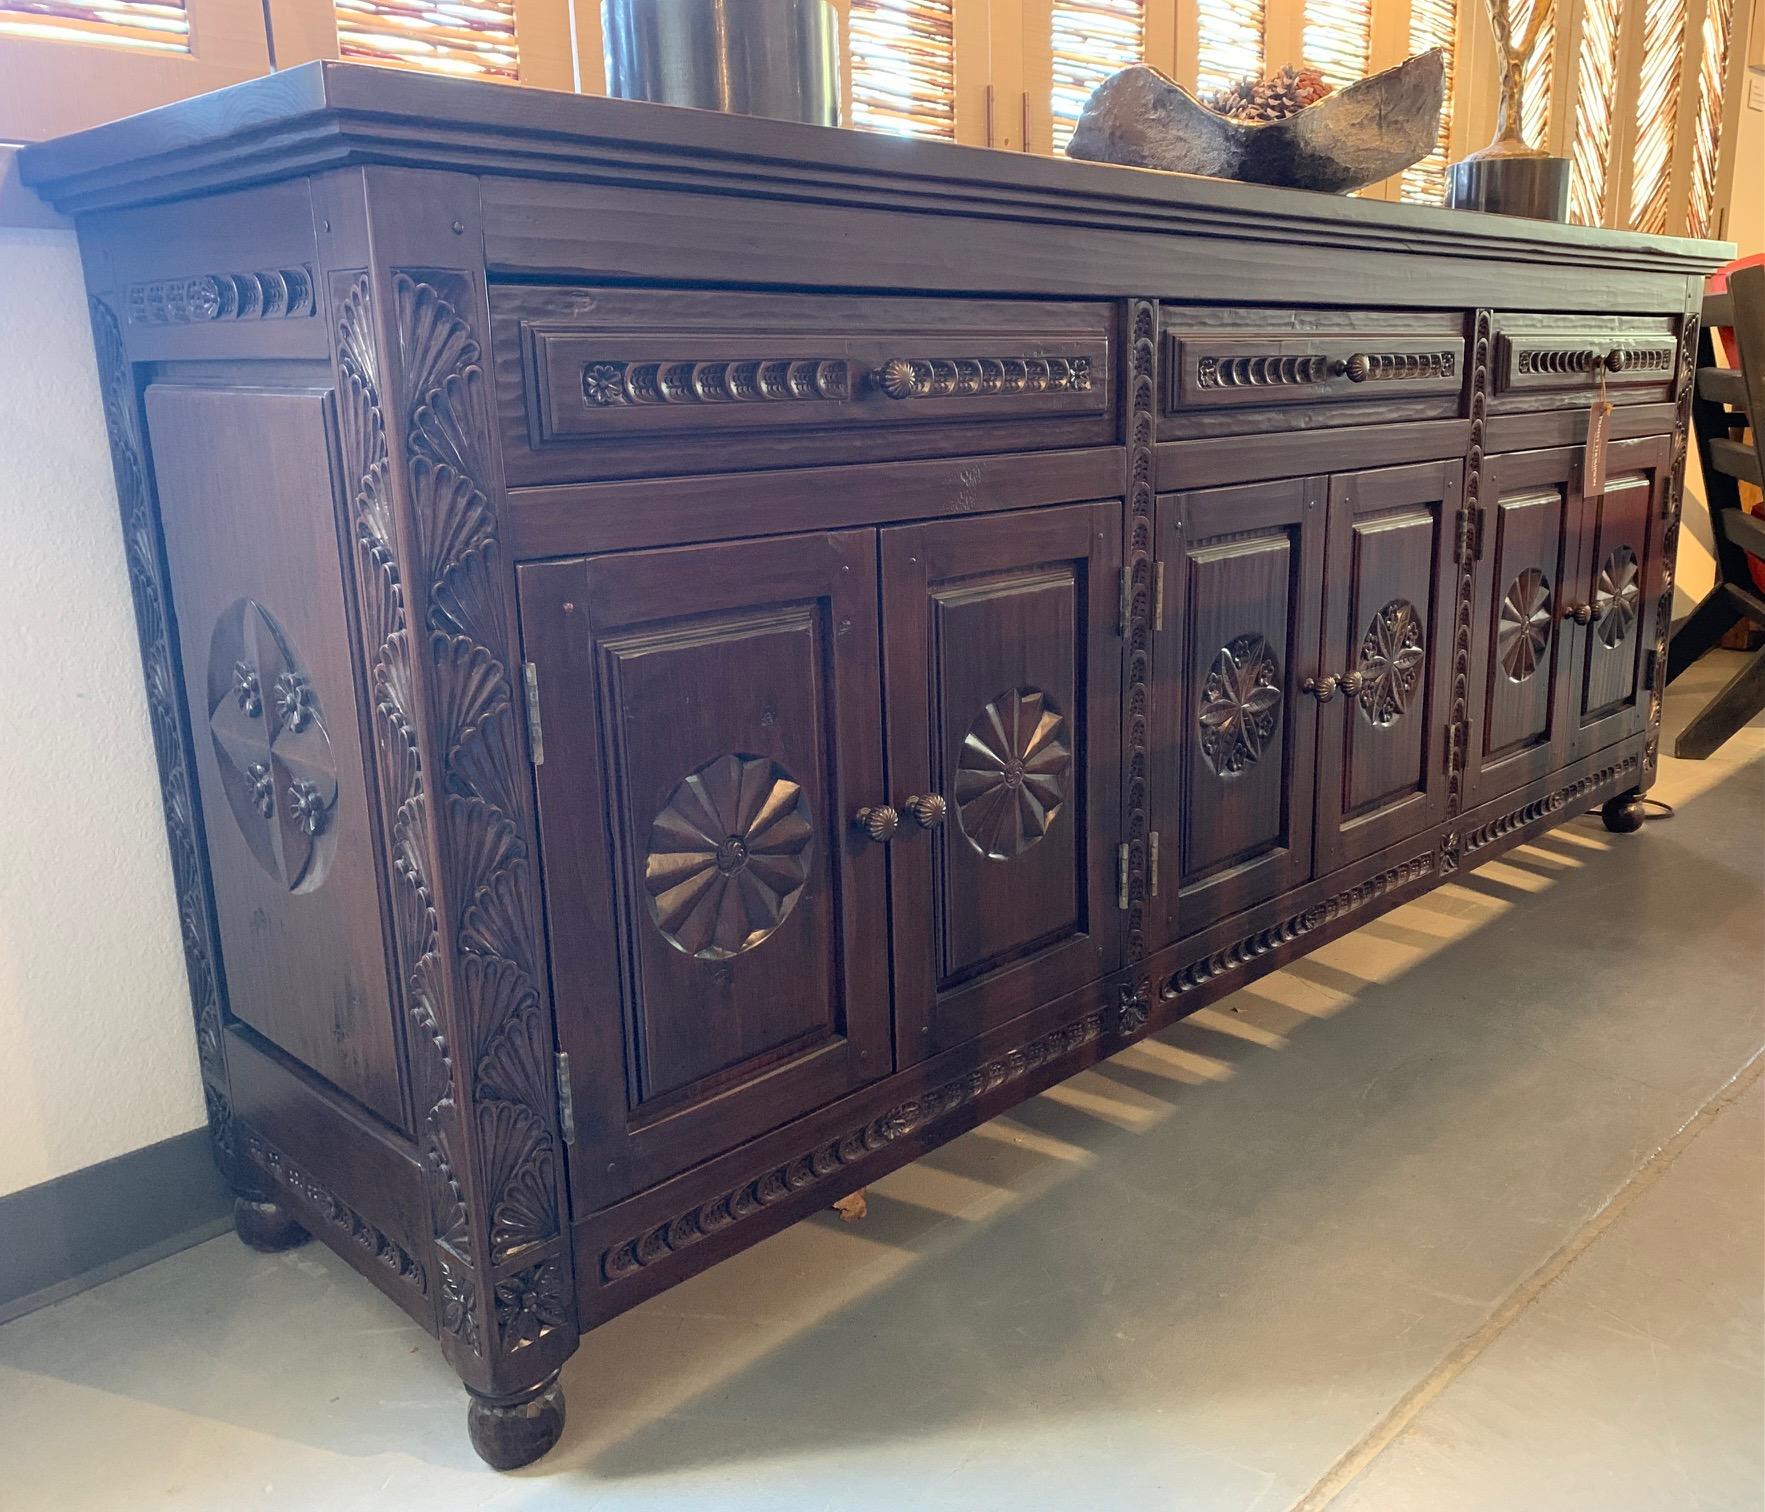 This is a made to order piece. Stunningly carved by craftsmen in New Mexico. The showroom model shown in photos is Knotty Alder with a Double Glaze Seville Finish. Showroom floor model not for sale...

Please inquire about finish options.
 